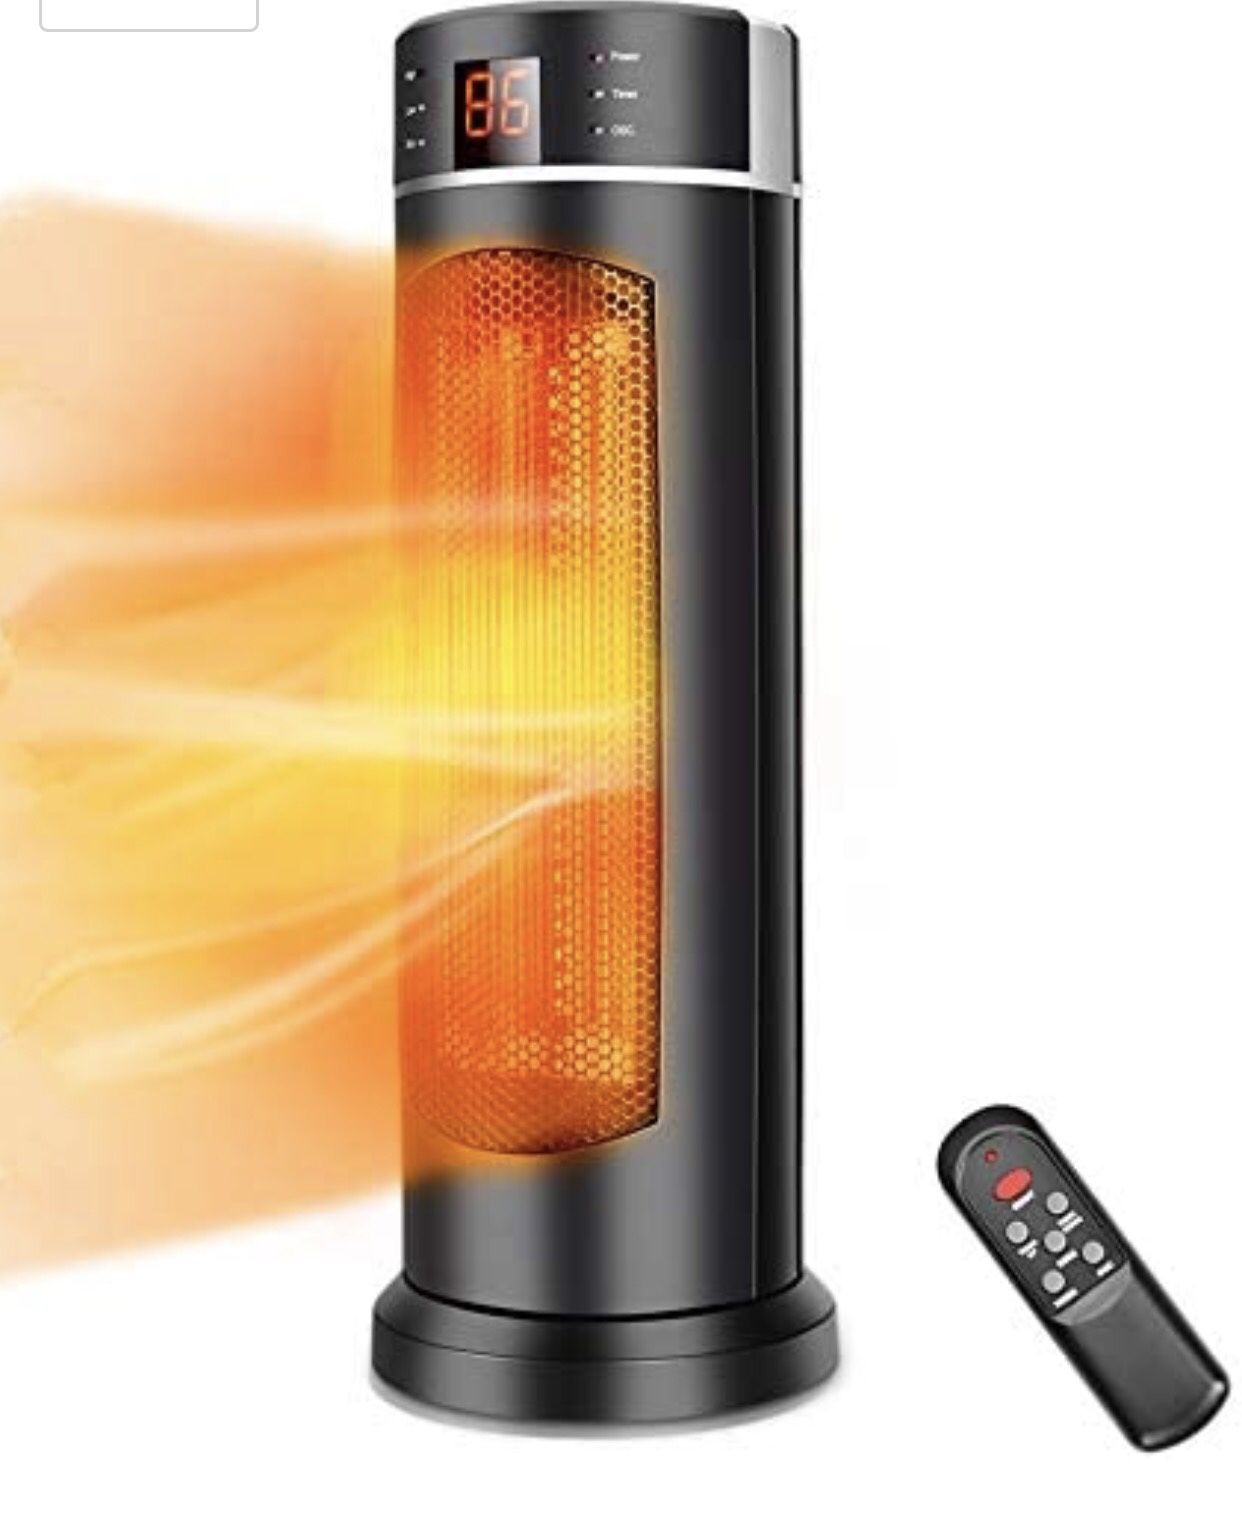 Space Heater - TRUSTECH Tower Heater 1500W 70° Oscillation with Remote Control, Overheating & Tip-Over Protection, Adjustable Thermostat, 12H Timer P